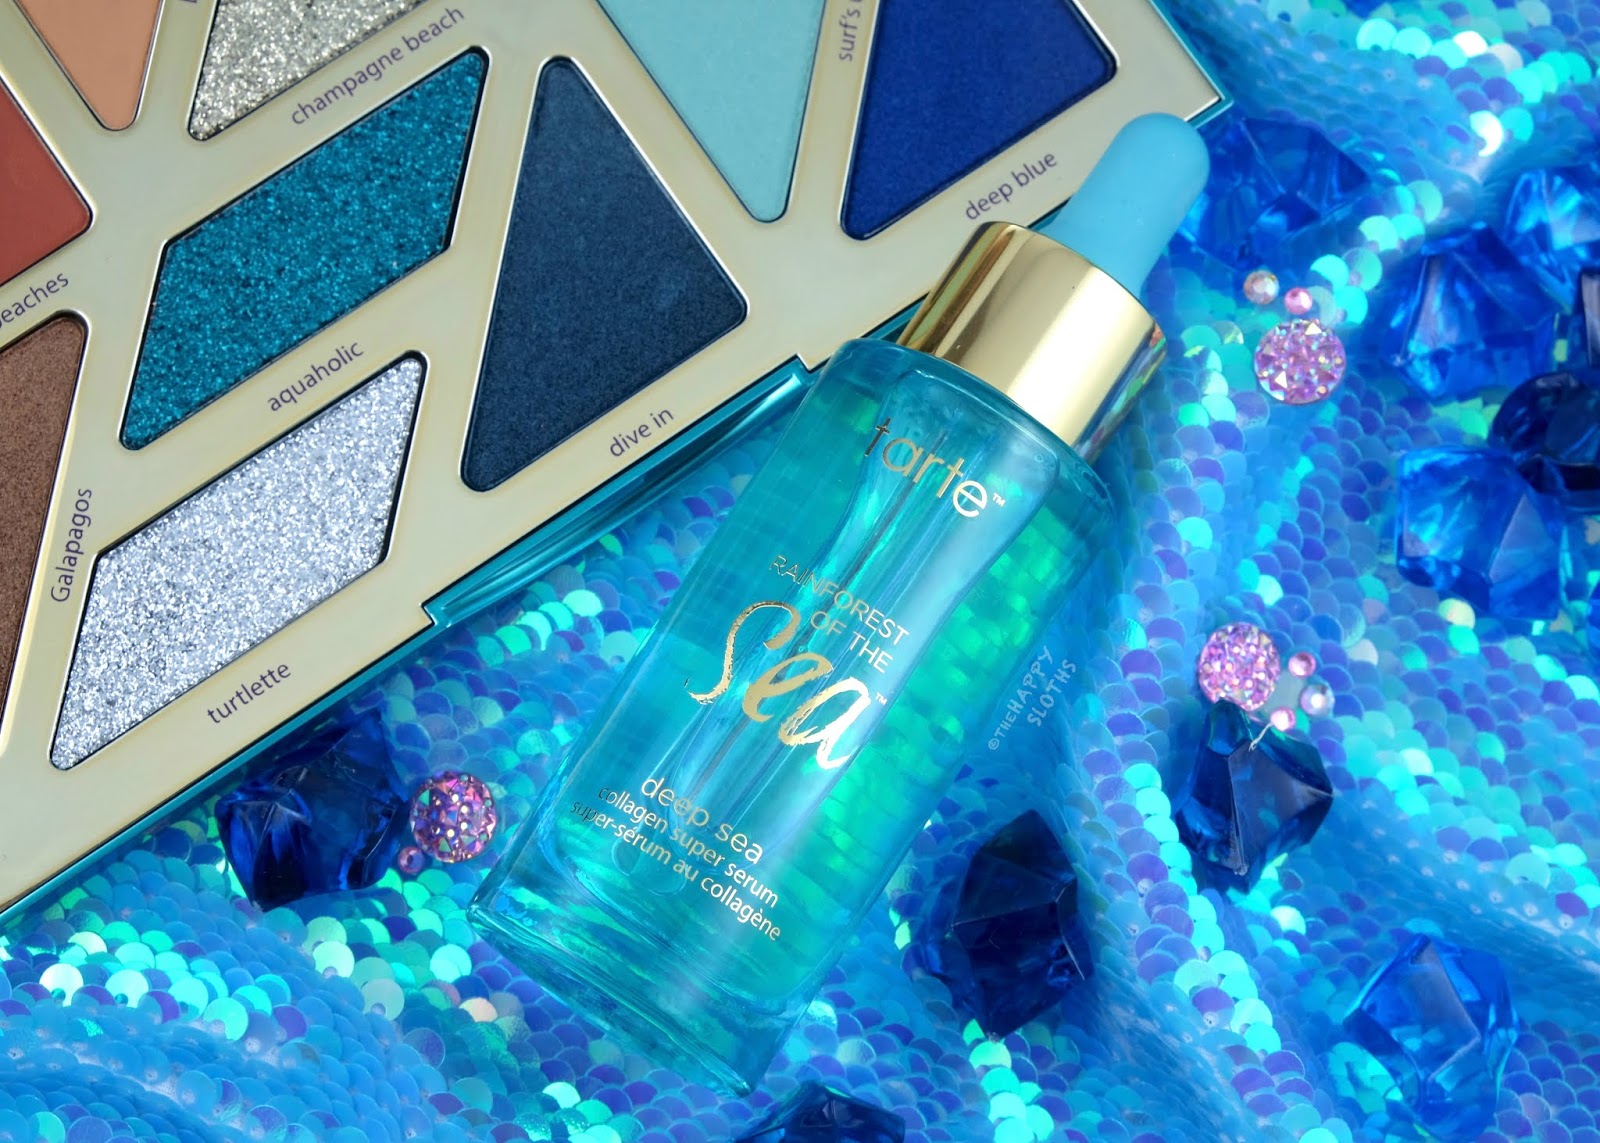 Tarte | Deep Sea Collagen Super Serum: Review and Swatches